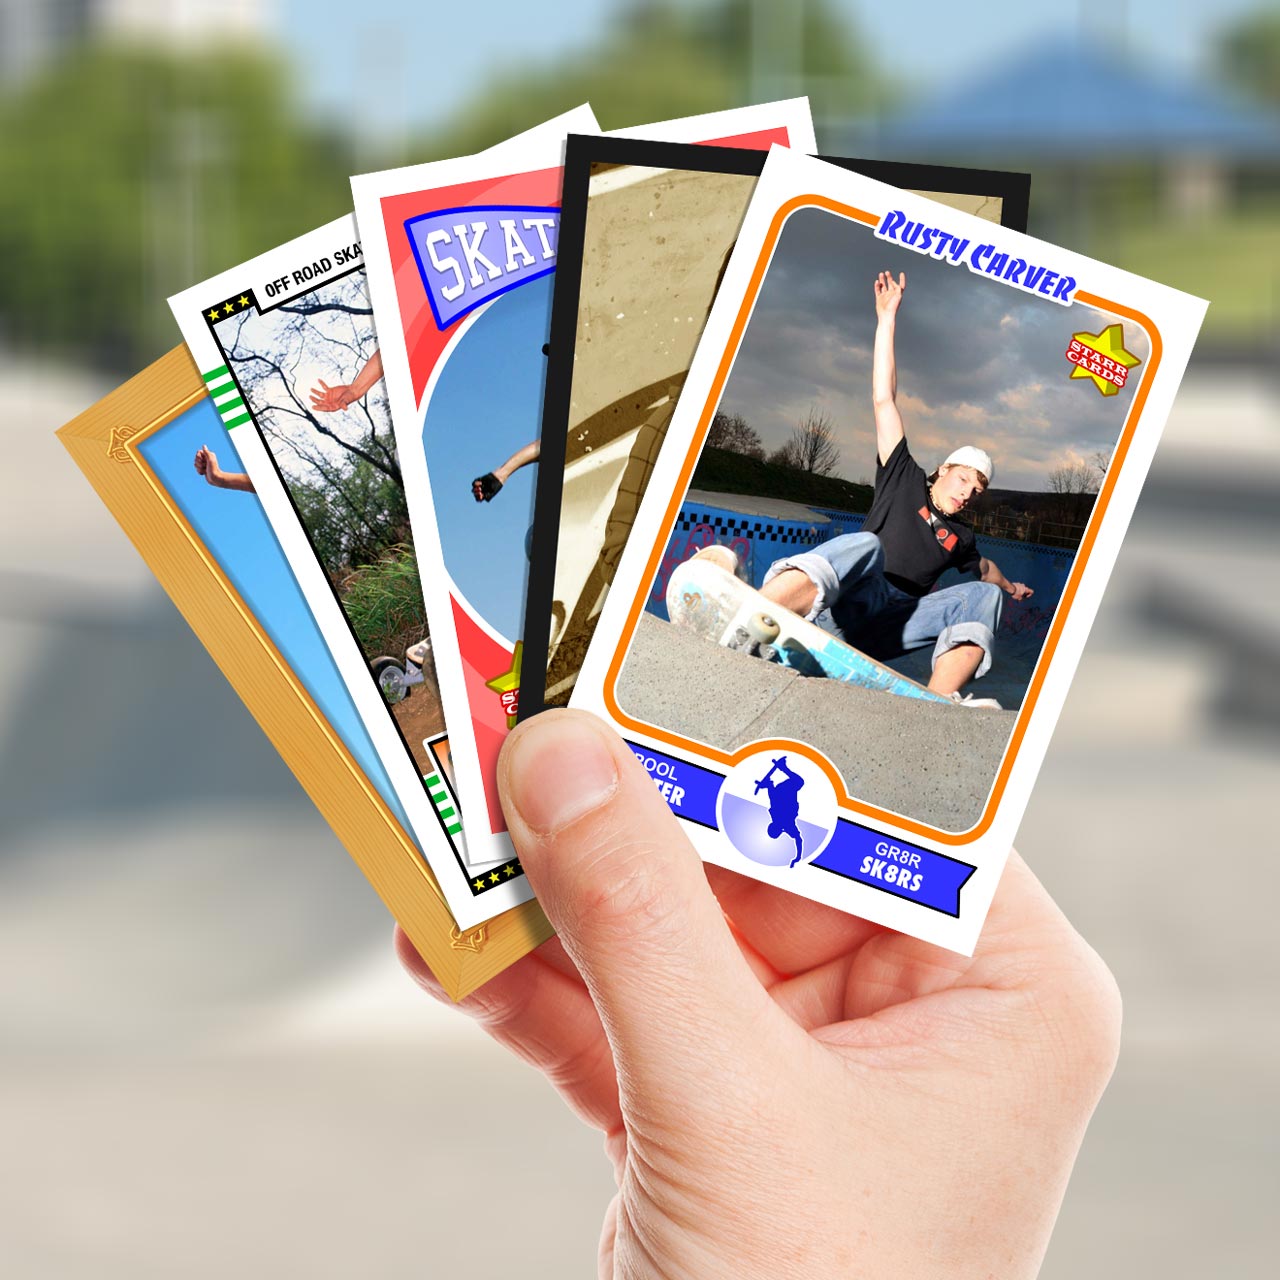 Make your own skateboarding card with Starr Cards.